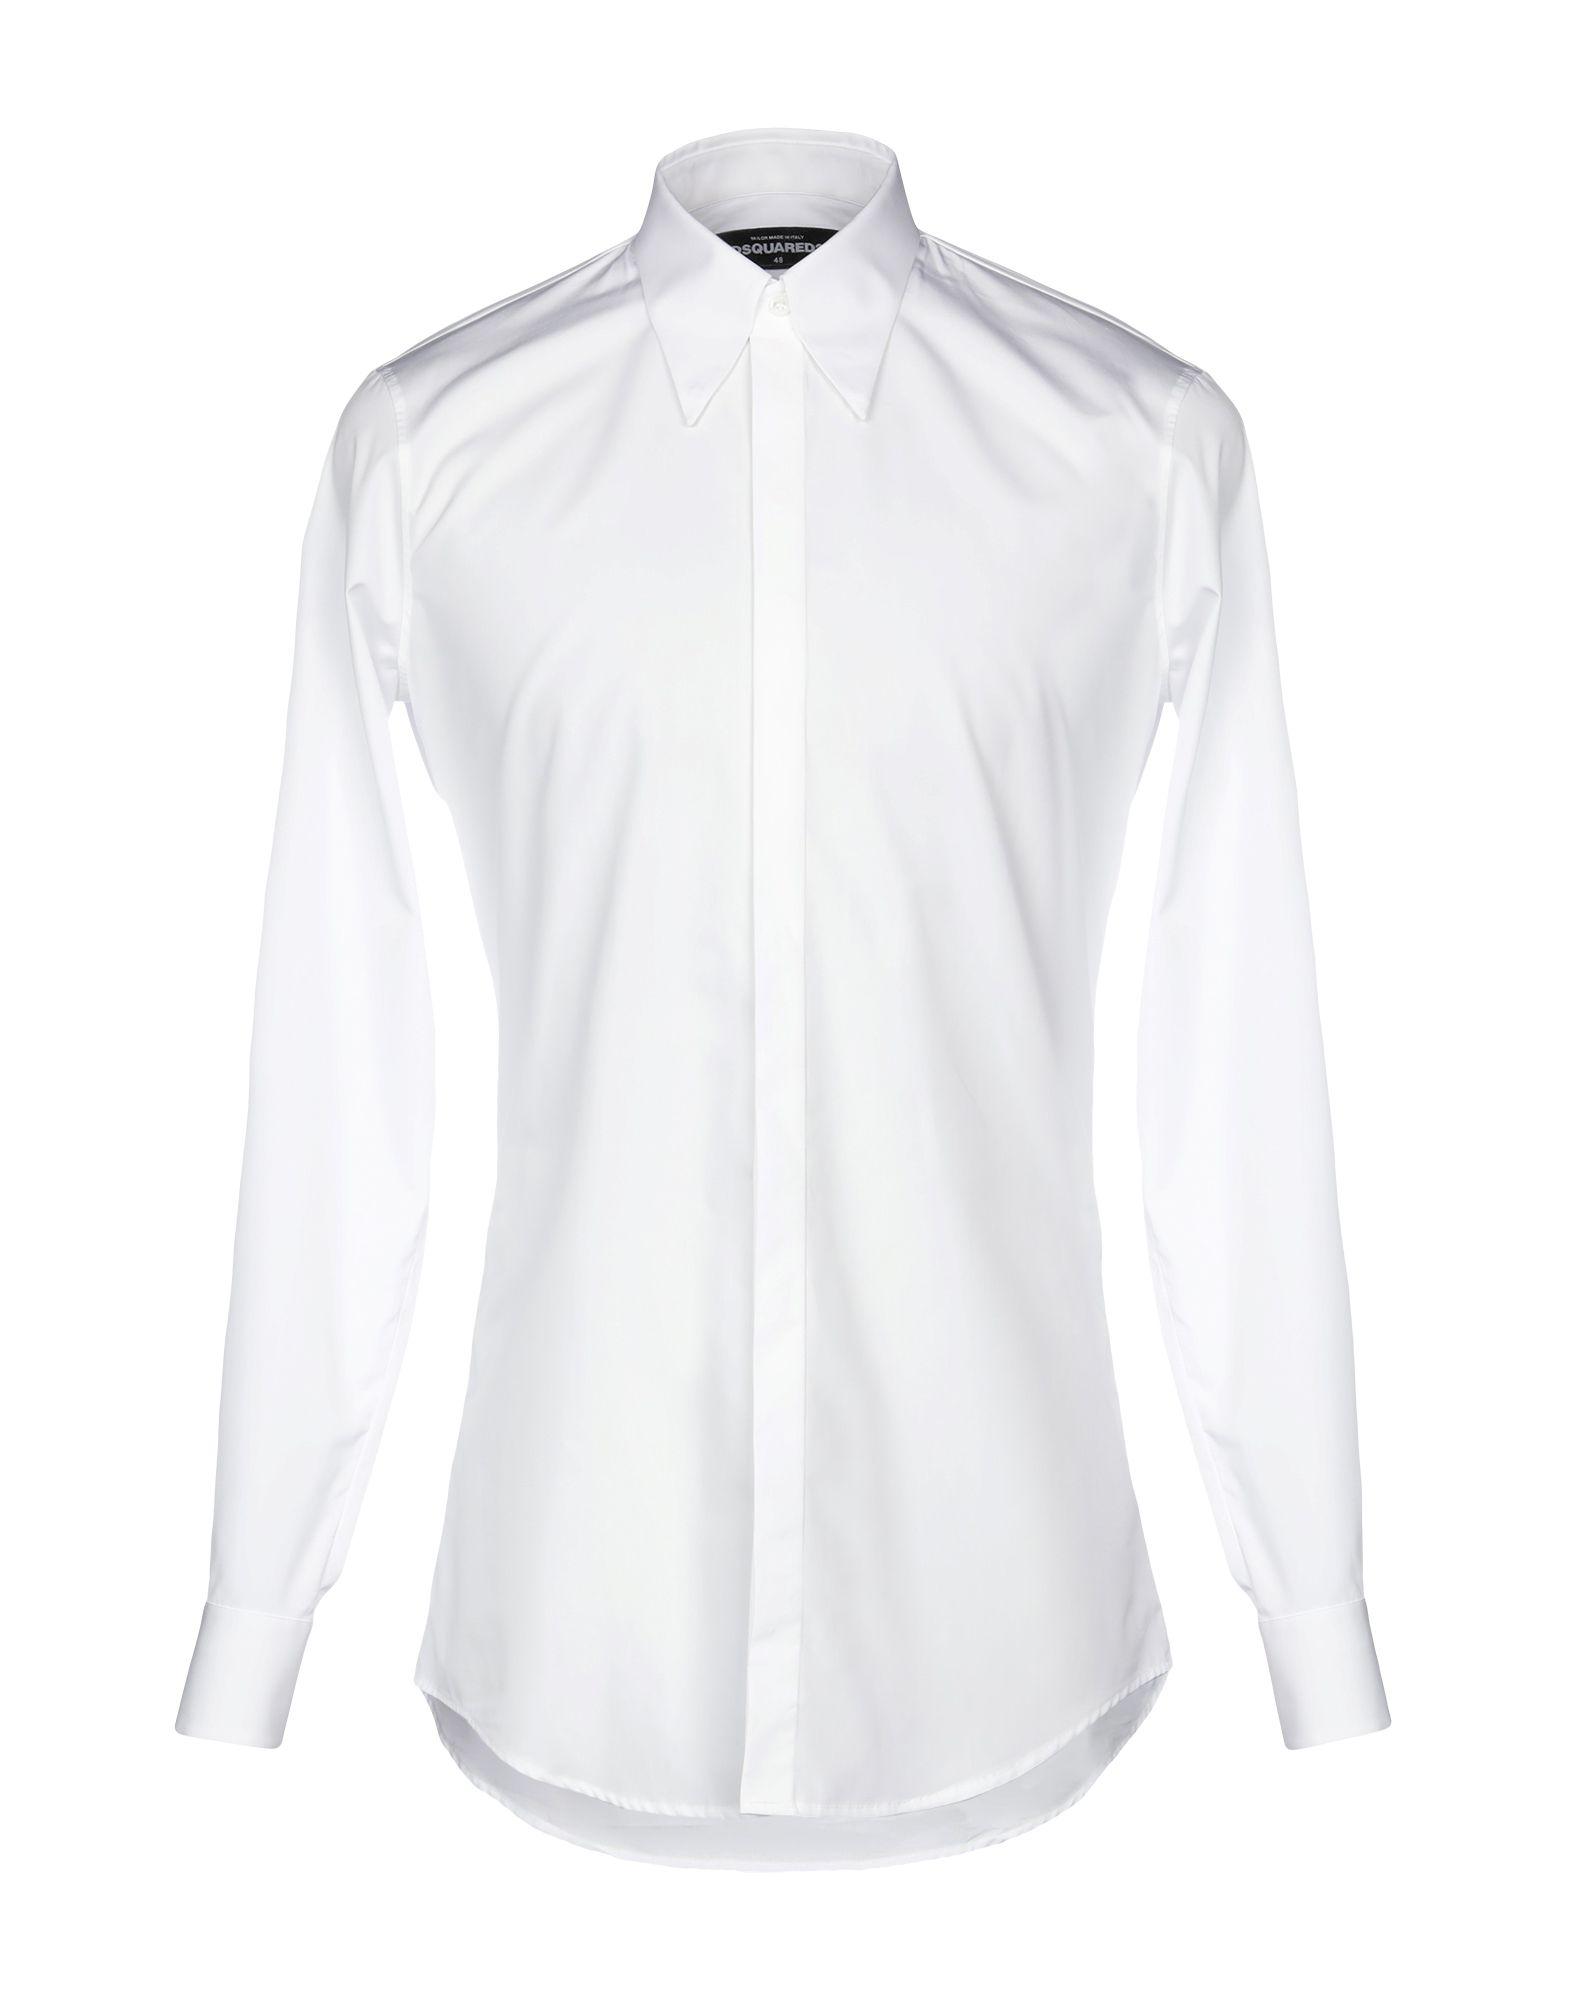 DSquared² Cotton Shirt in White for Men - Save 51% - Lyst